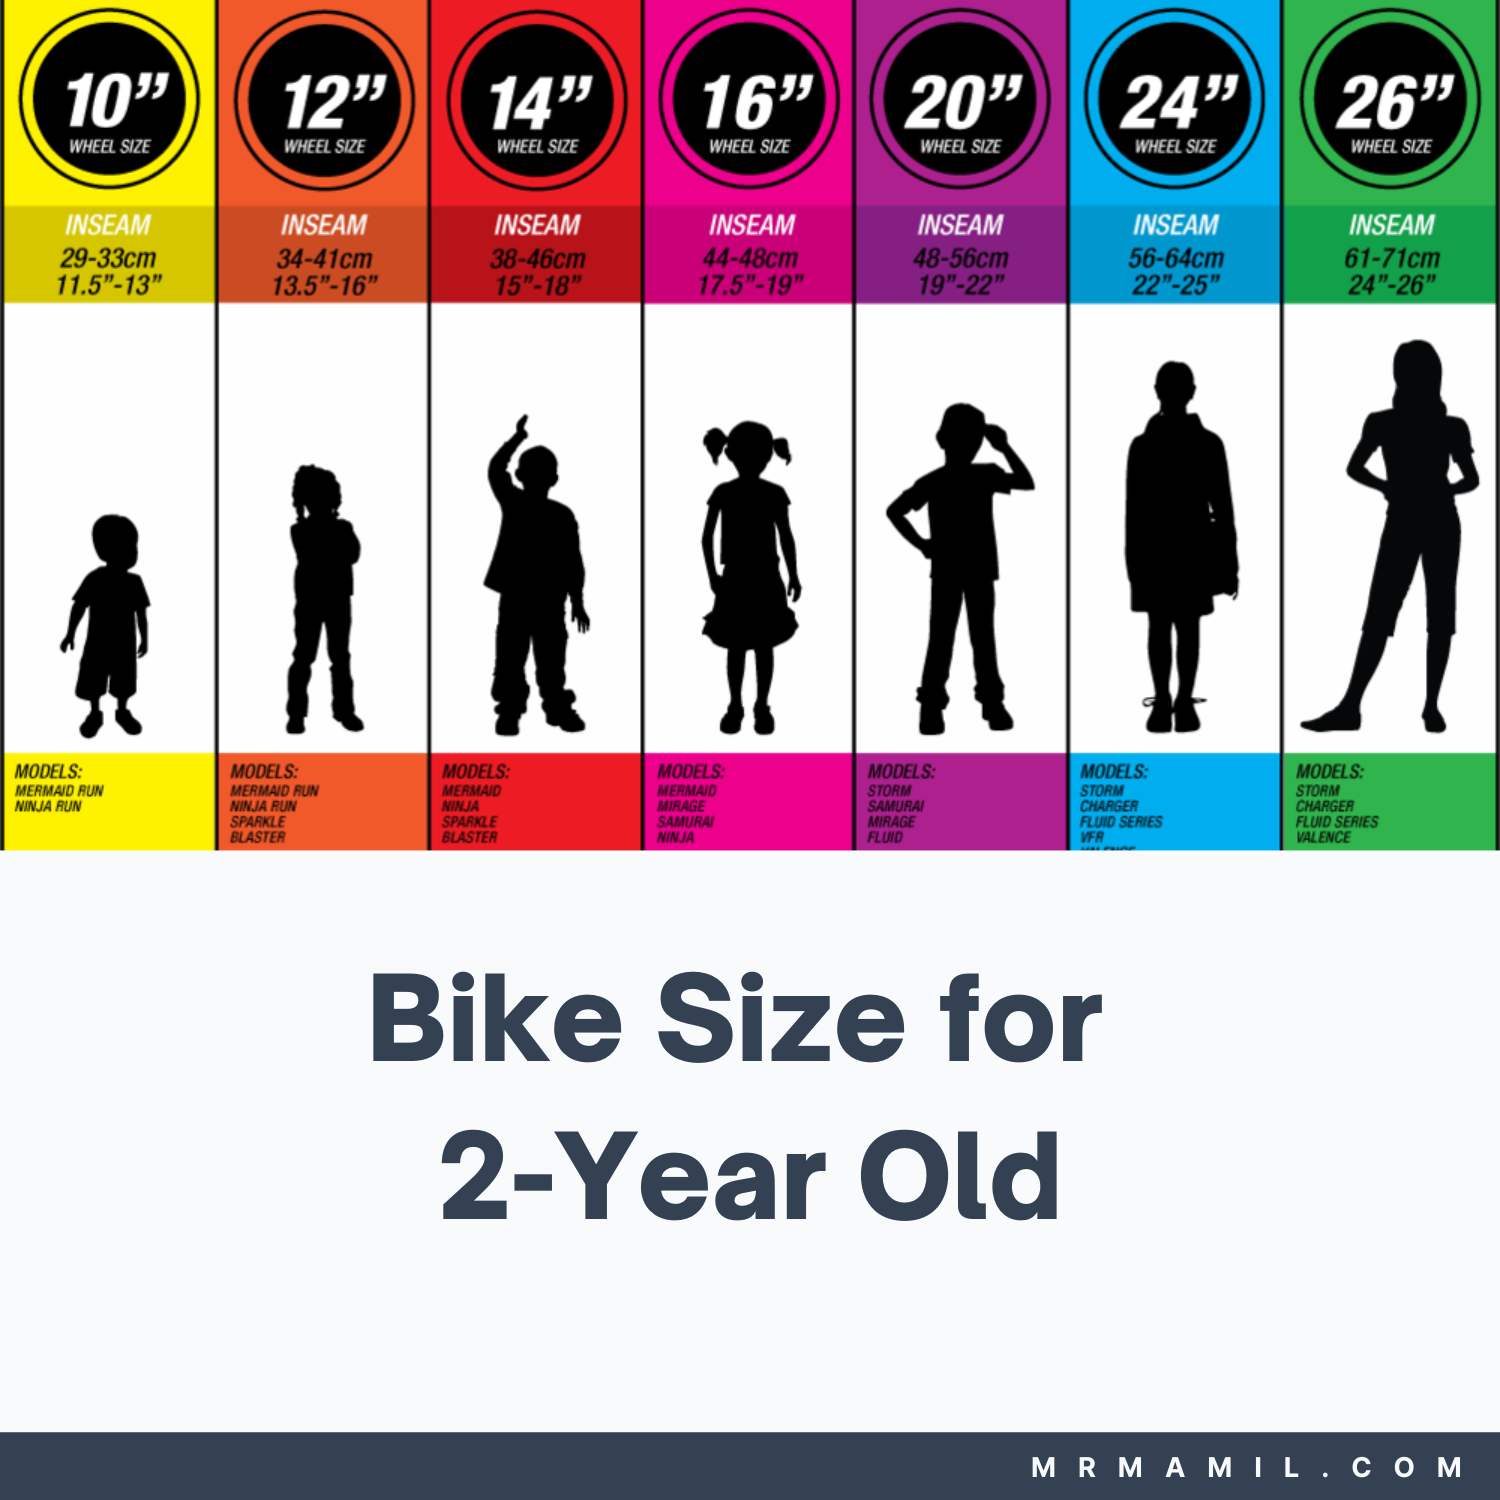 Bike Size for 2 Year Old